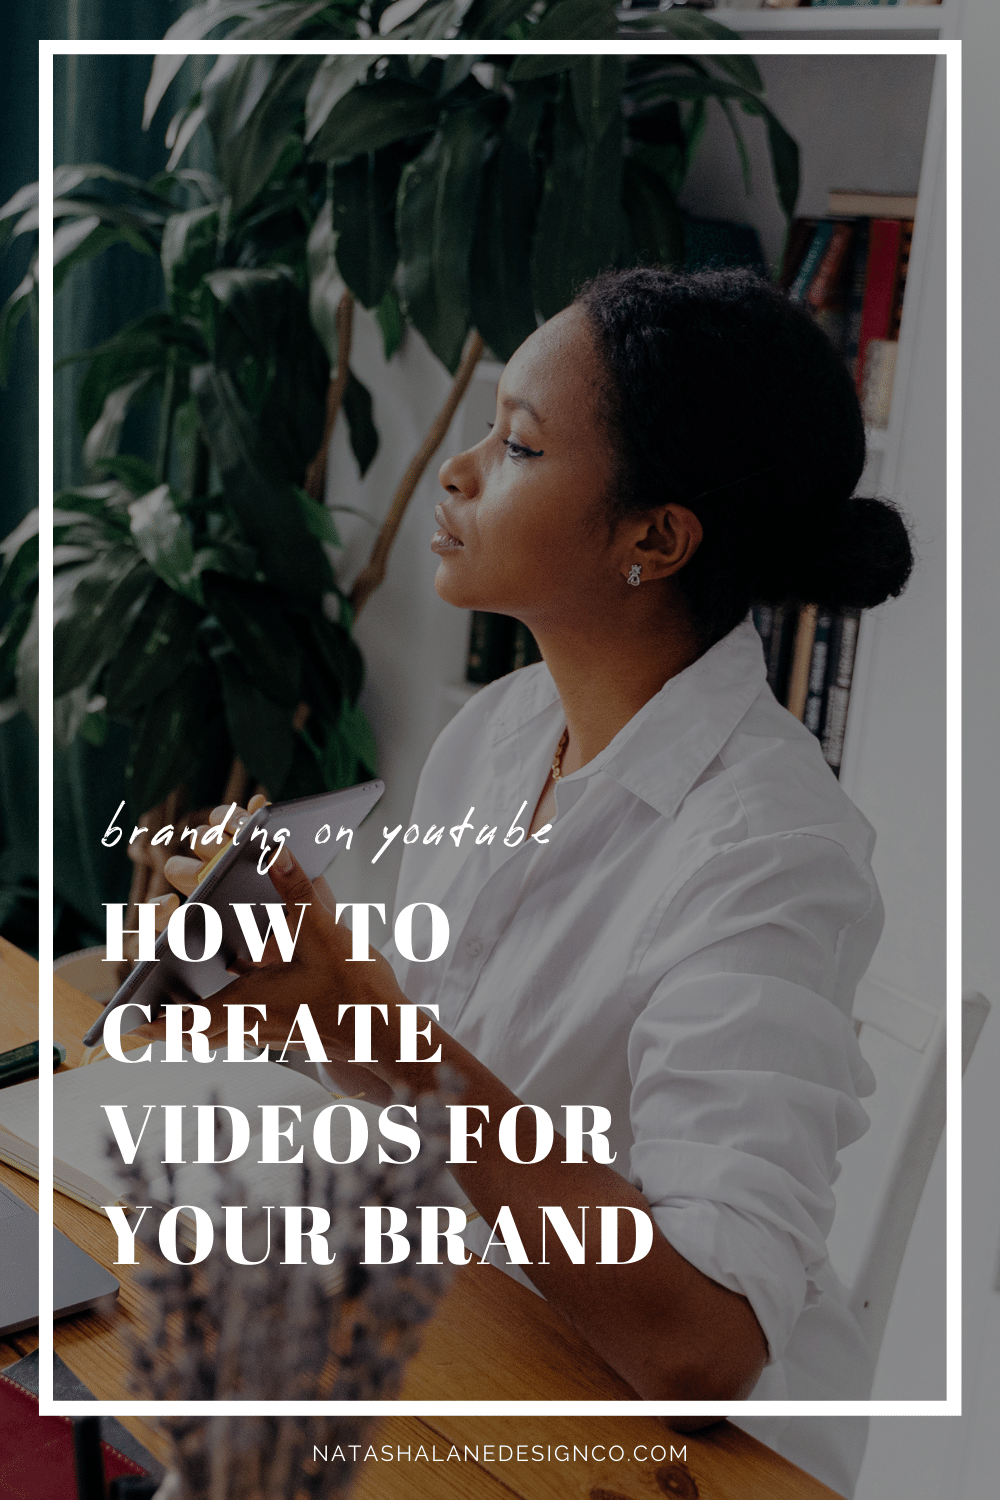 Branding on YouTube (How to create videos for your brand) (2)